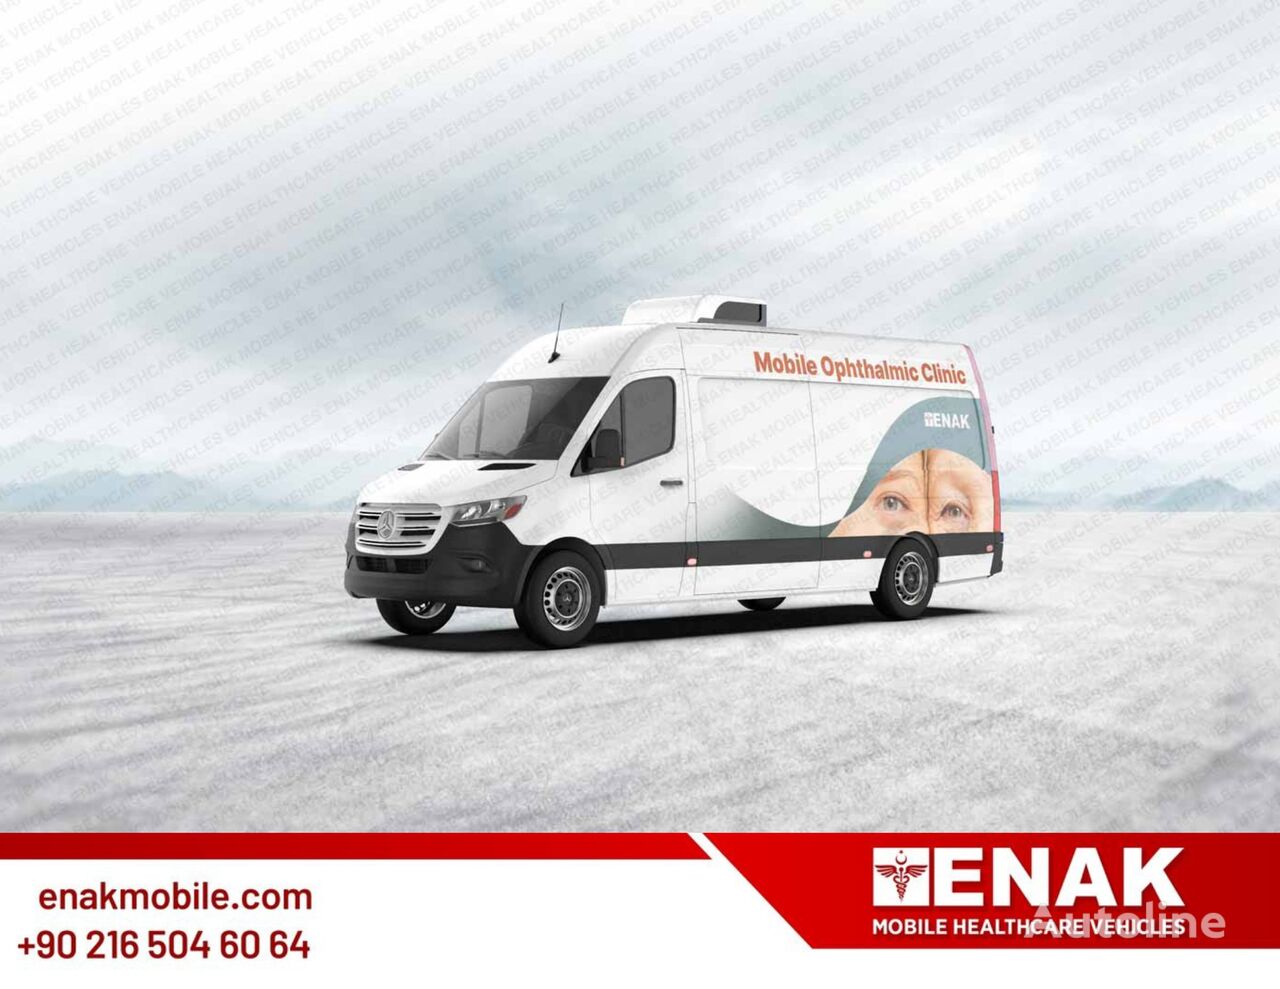 ambulância Mercedes-Benz Mobile Clinic Ophthalmic Vehicle novo